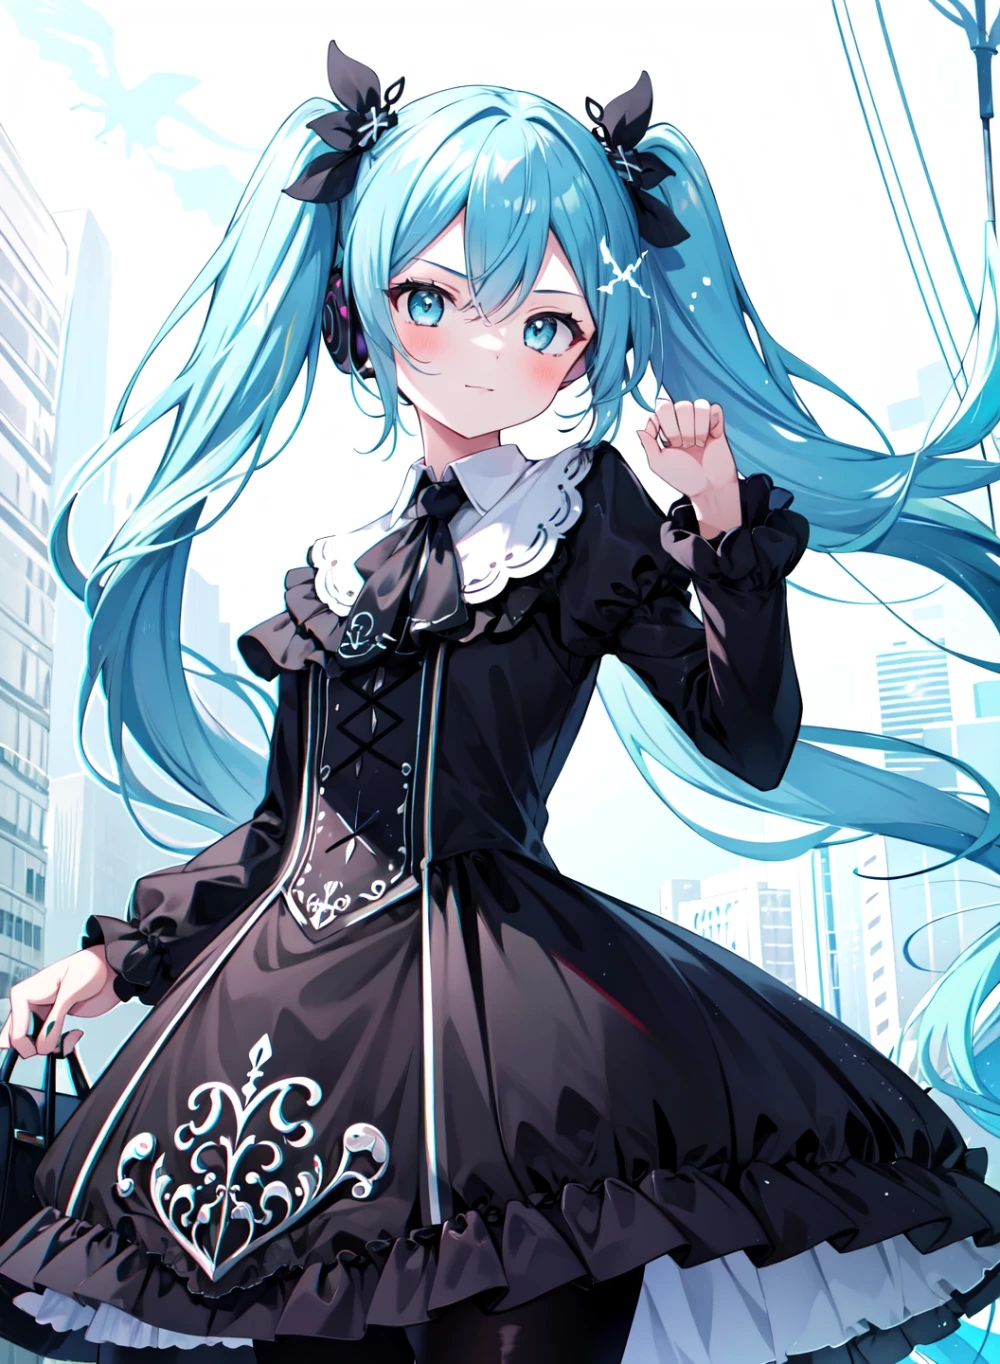 hatsune-miku-anime-style-all-ages-2-40